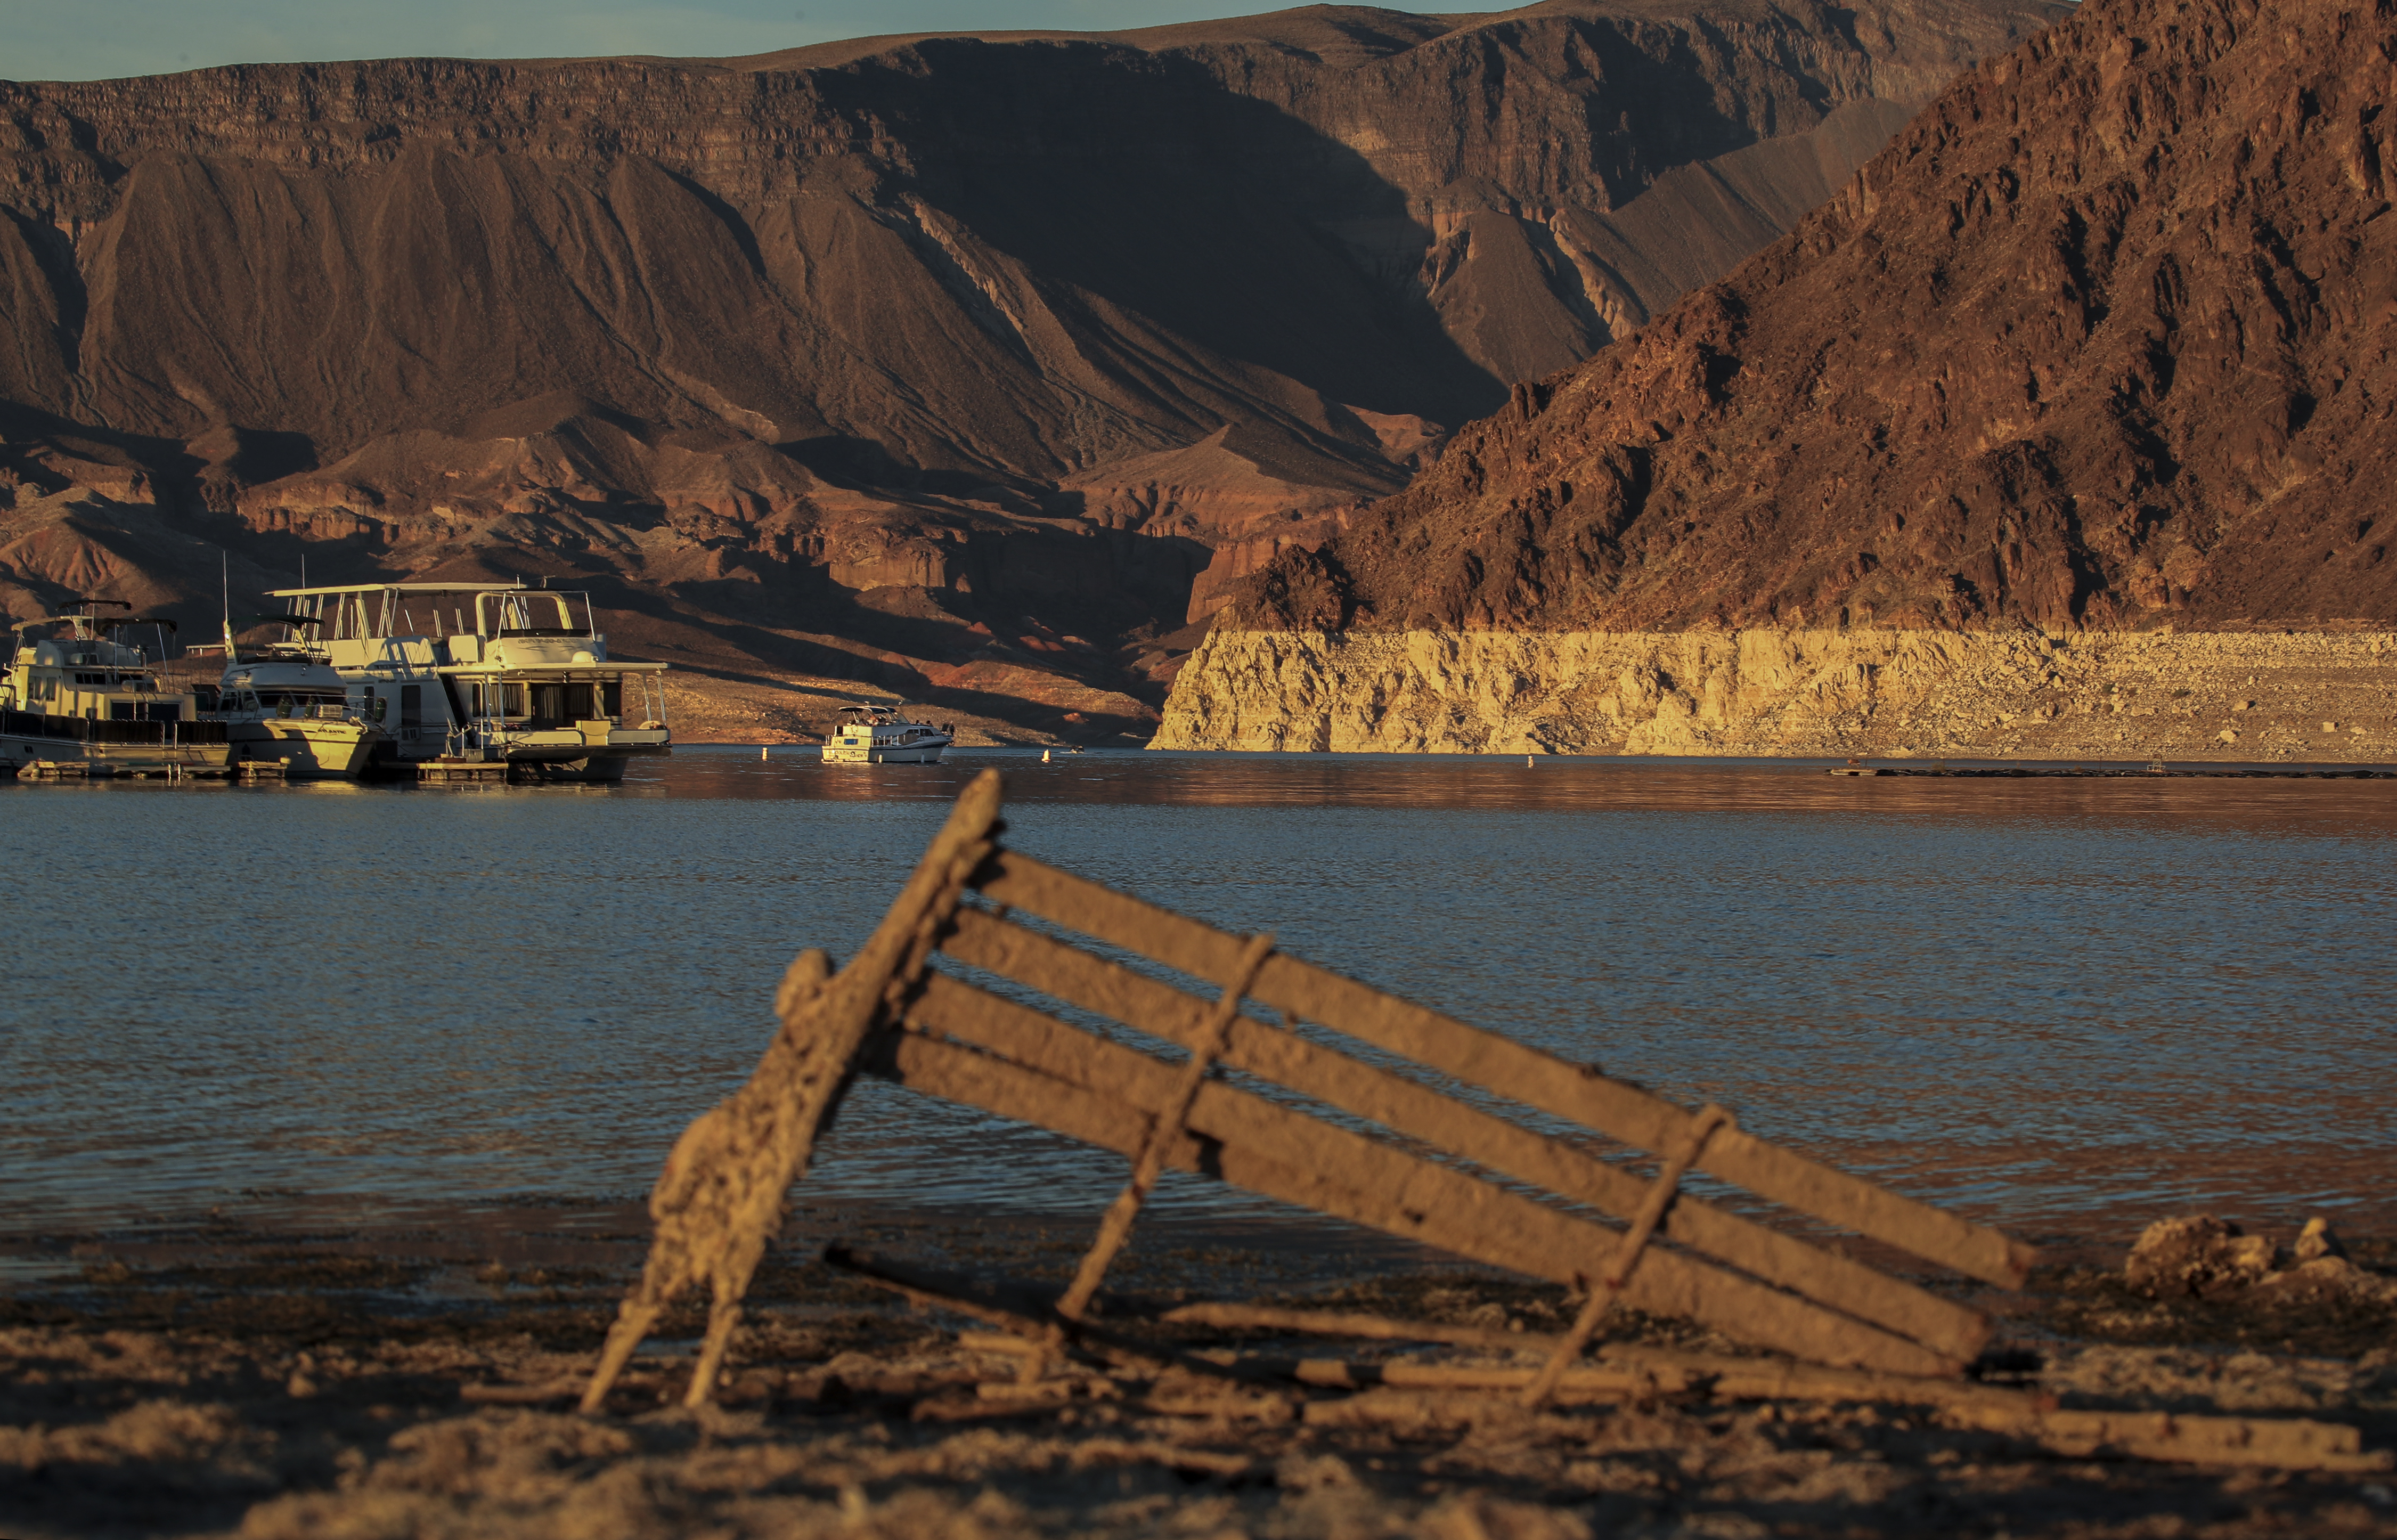 500-plus plan to save Lake Mead is monumental and still solves nothing